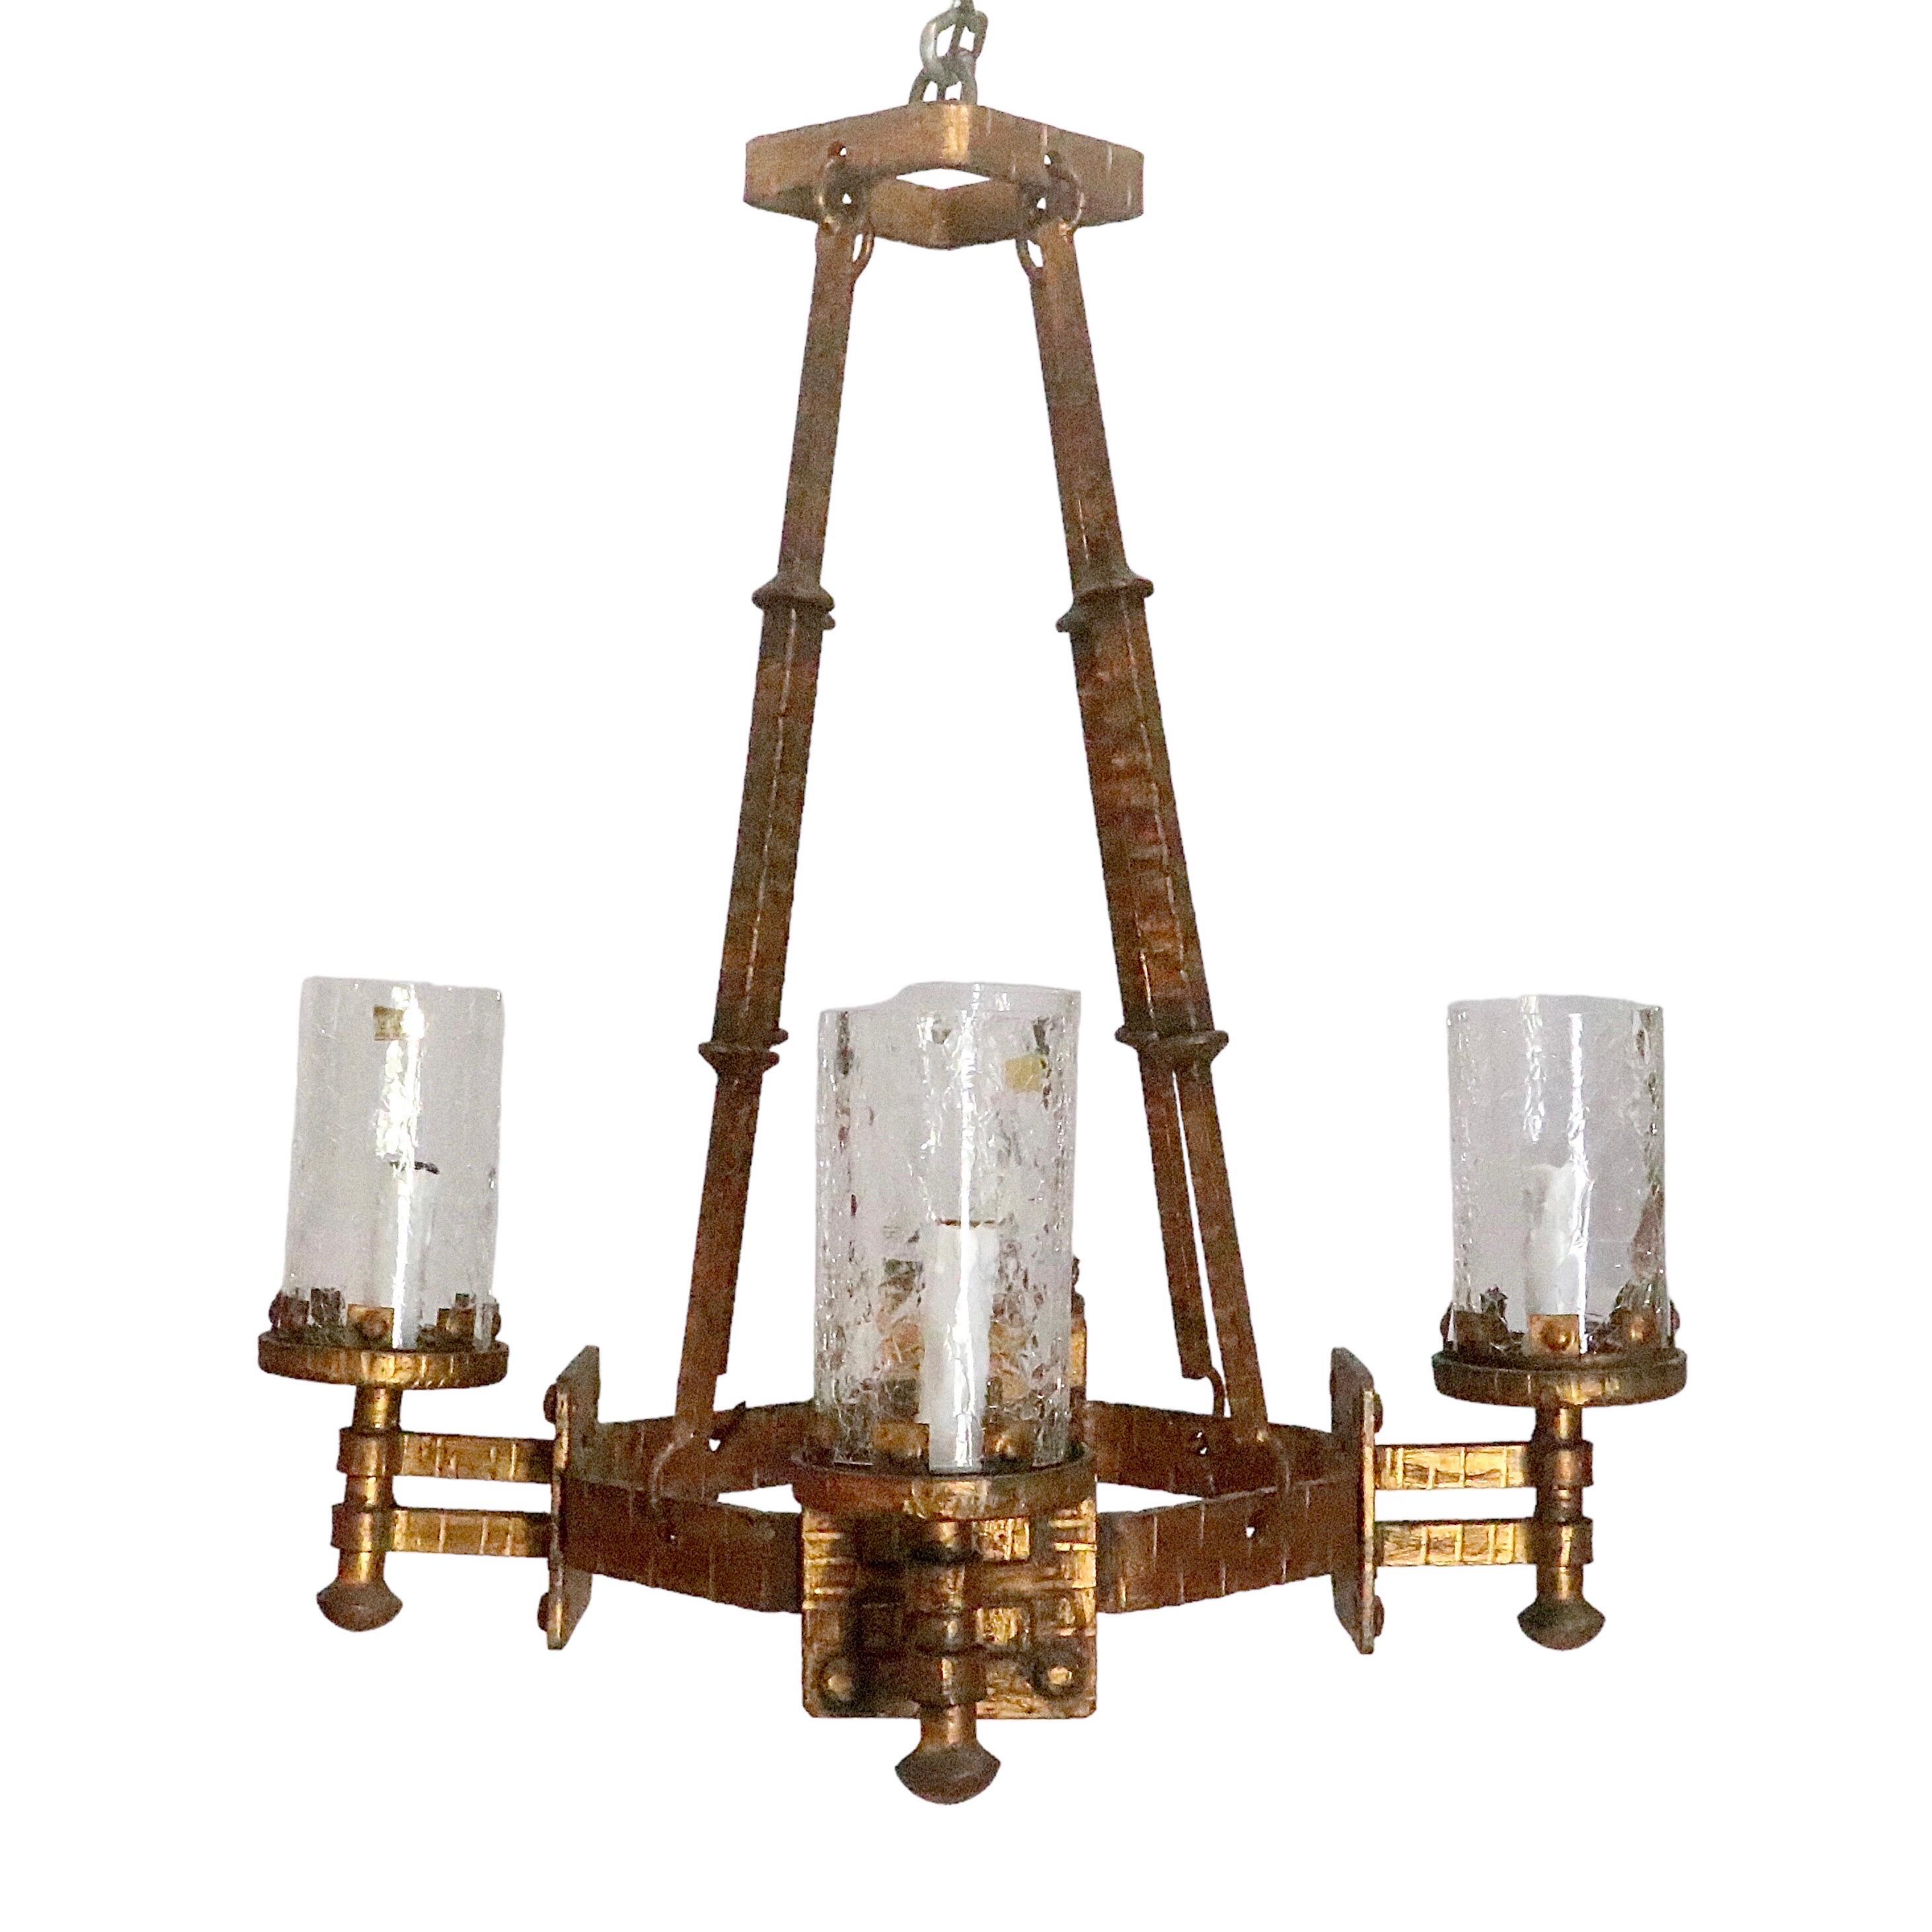 This beautiful hanging light is authentic hand forged wrought iron. Decorated with beautiful hand made iron accents. 

Features an antique gold finish.

Circa 2000.

Total Fixture Dimension: Total Drop Height: 24 inches x Width: 21 inches; hanging